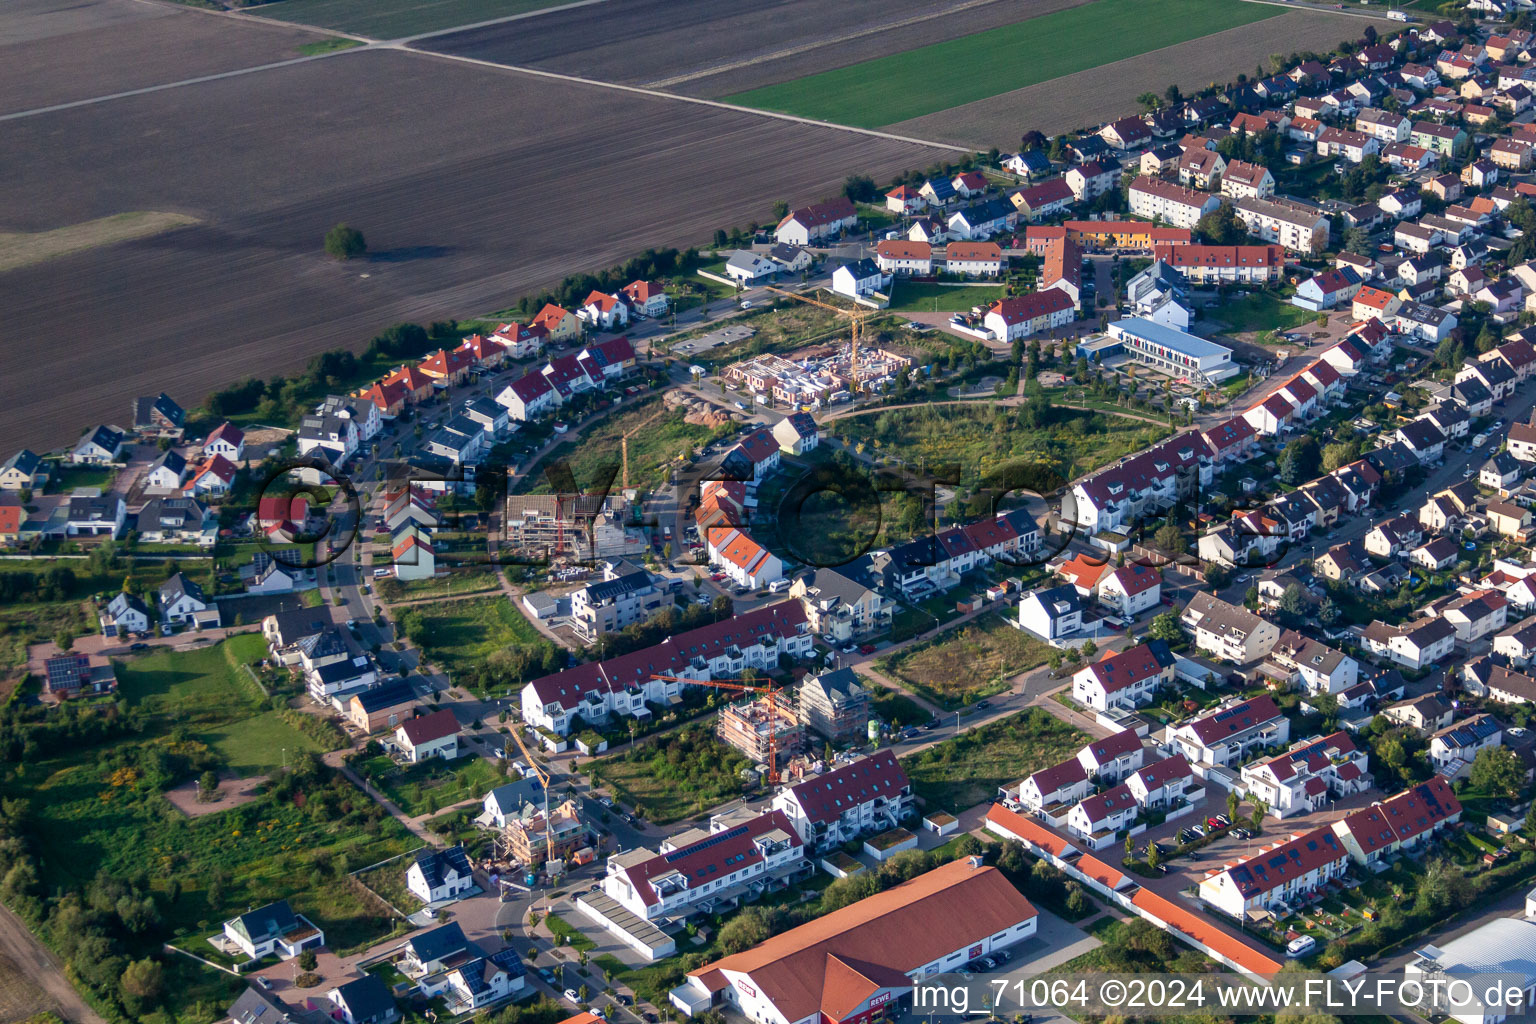 Aerial view of Medardus ring in Mutterstadt in the state Rhineland-Palatinate, Germany